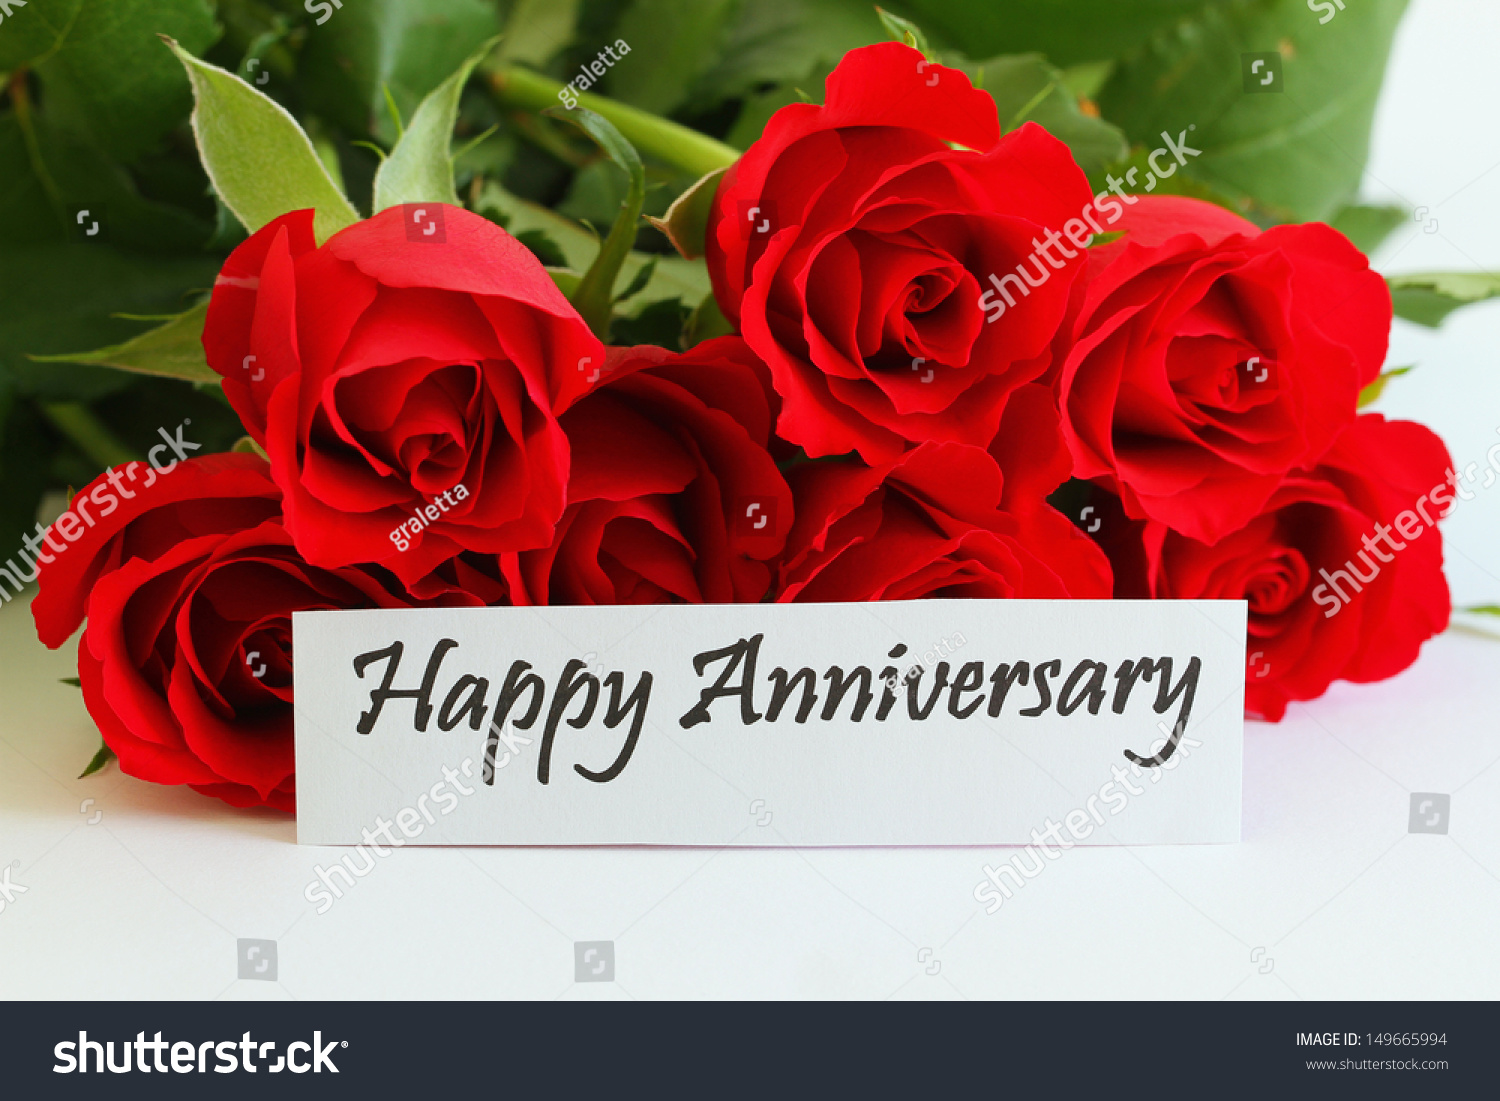  Happy  Anniversary  Card Red Roses  Stock Photo 149665994 